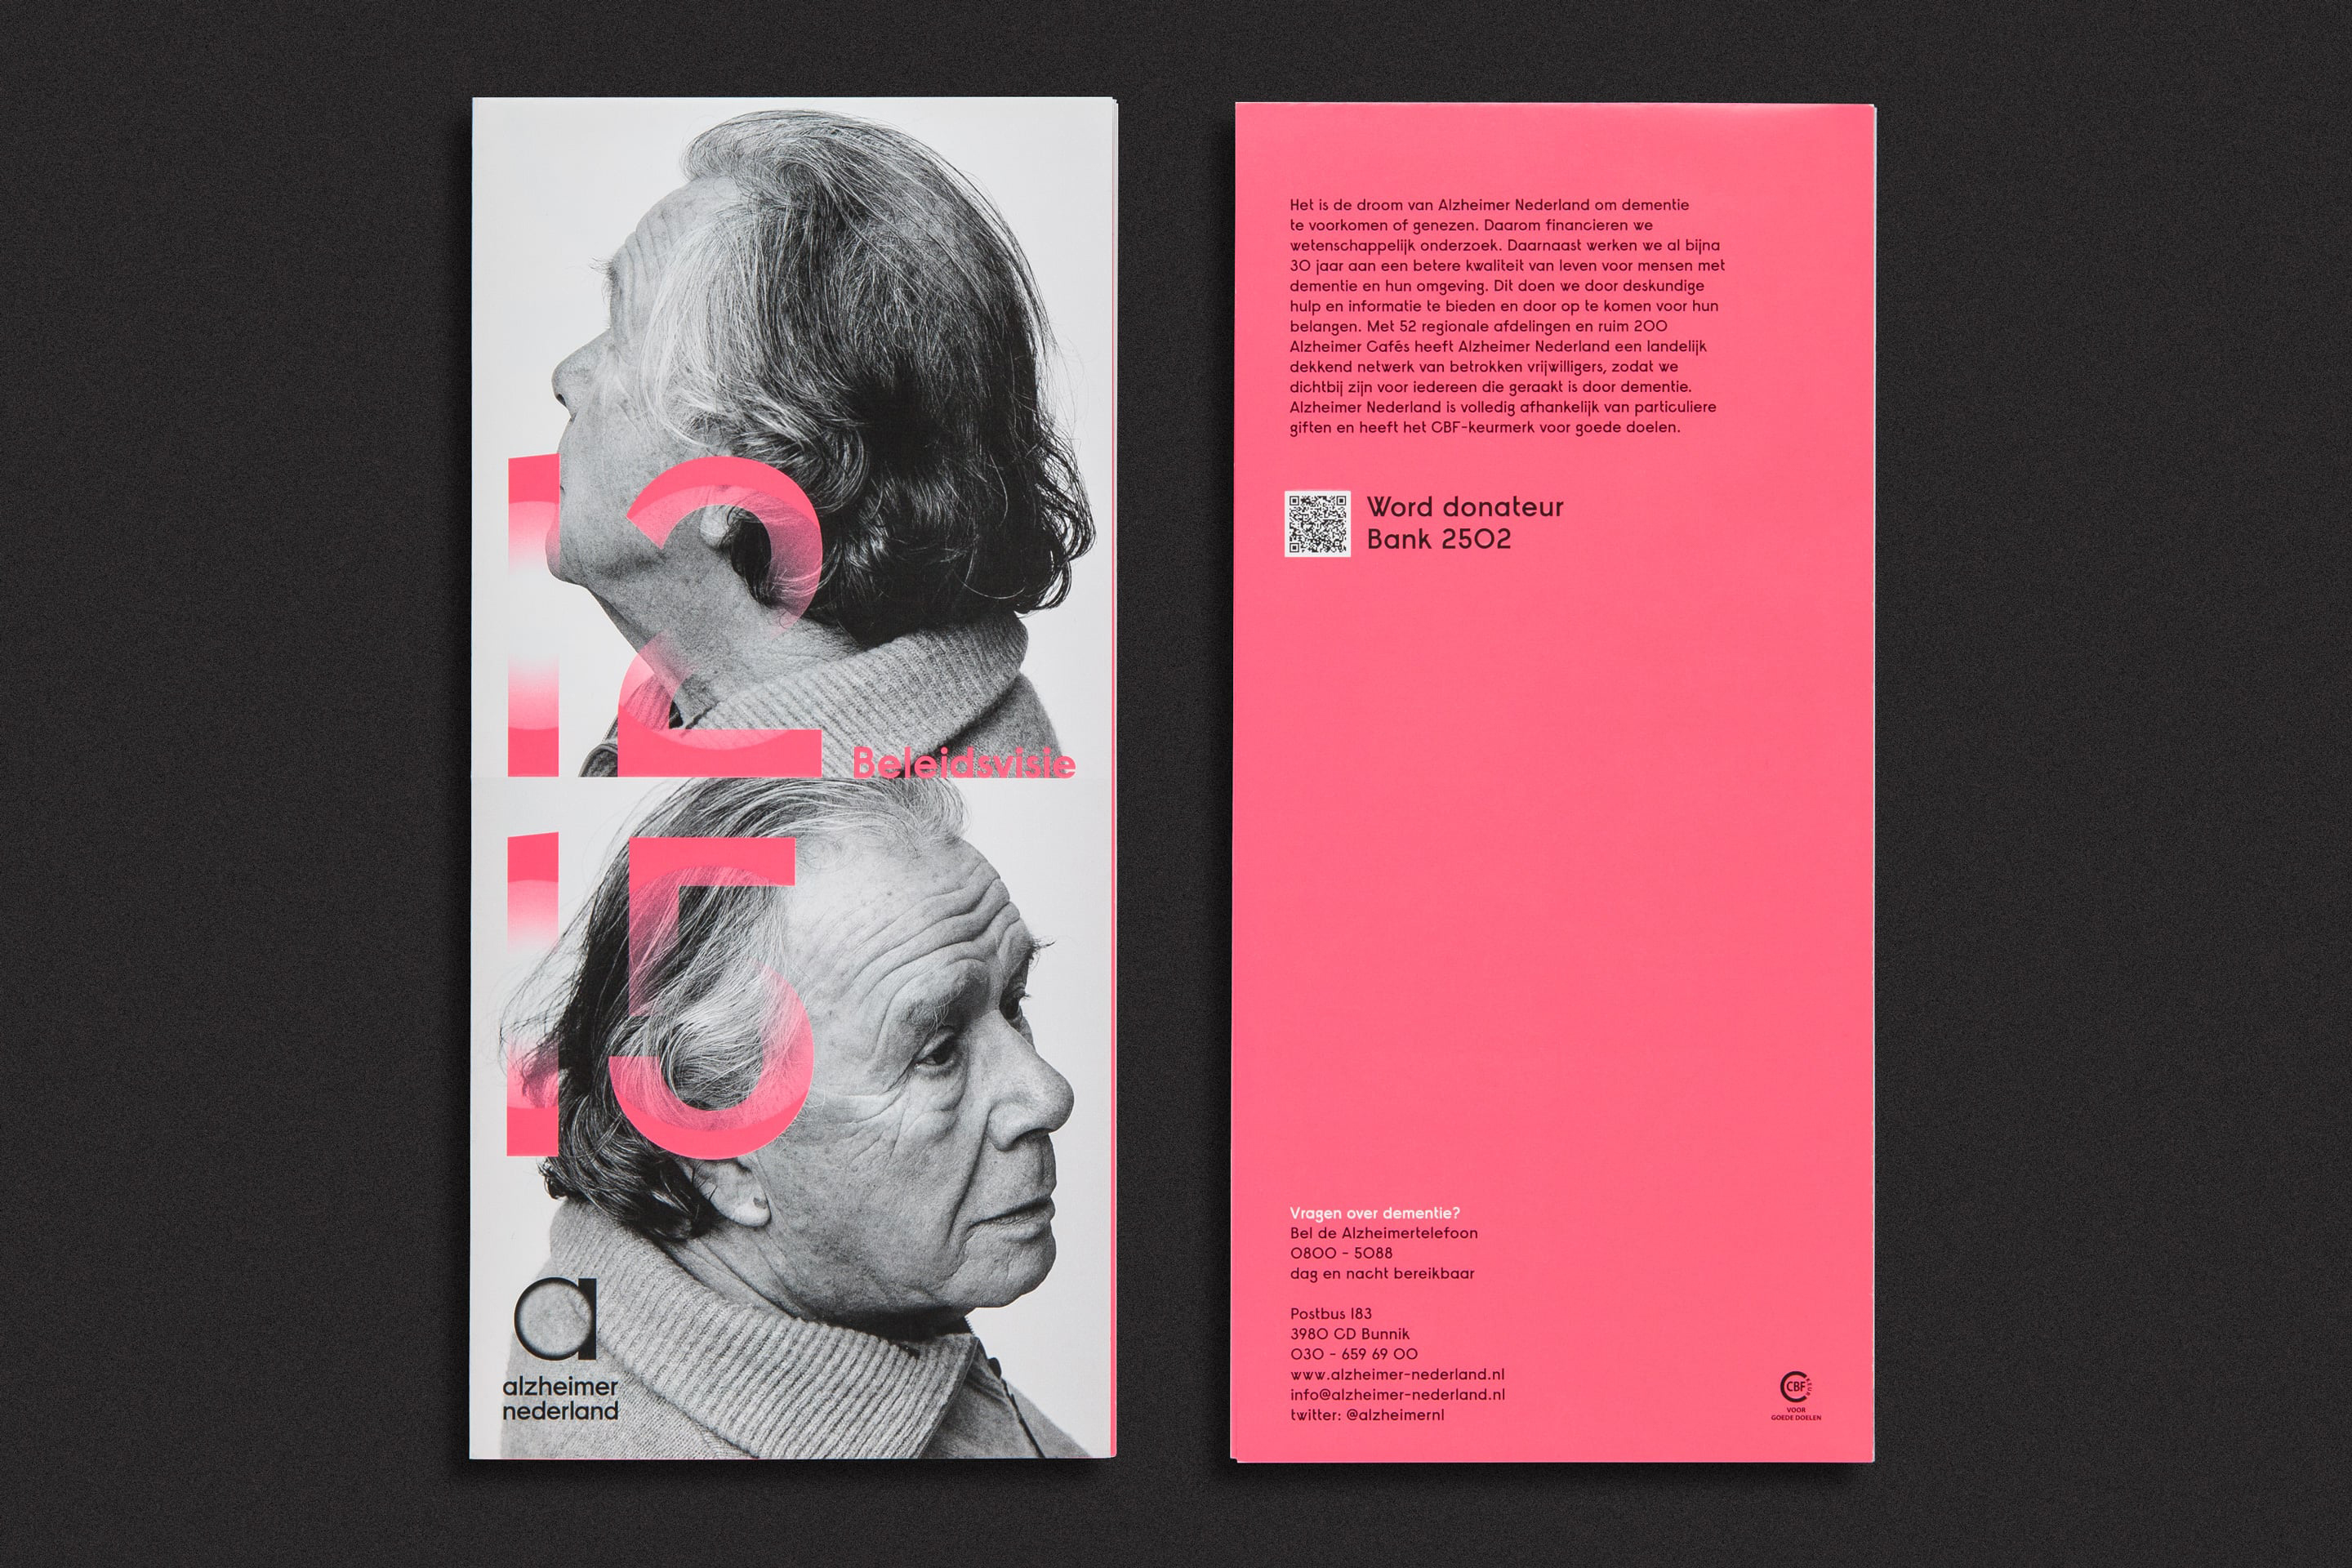 studio dumbar Alzheimer Nederland Brand identity folder design with photography and fading typography